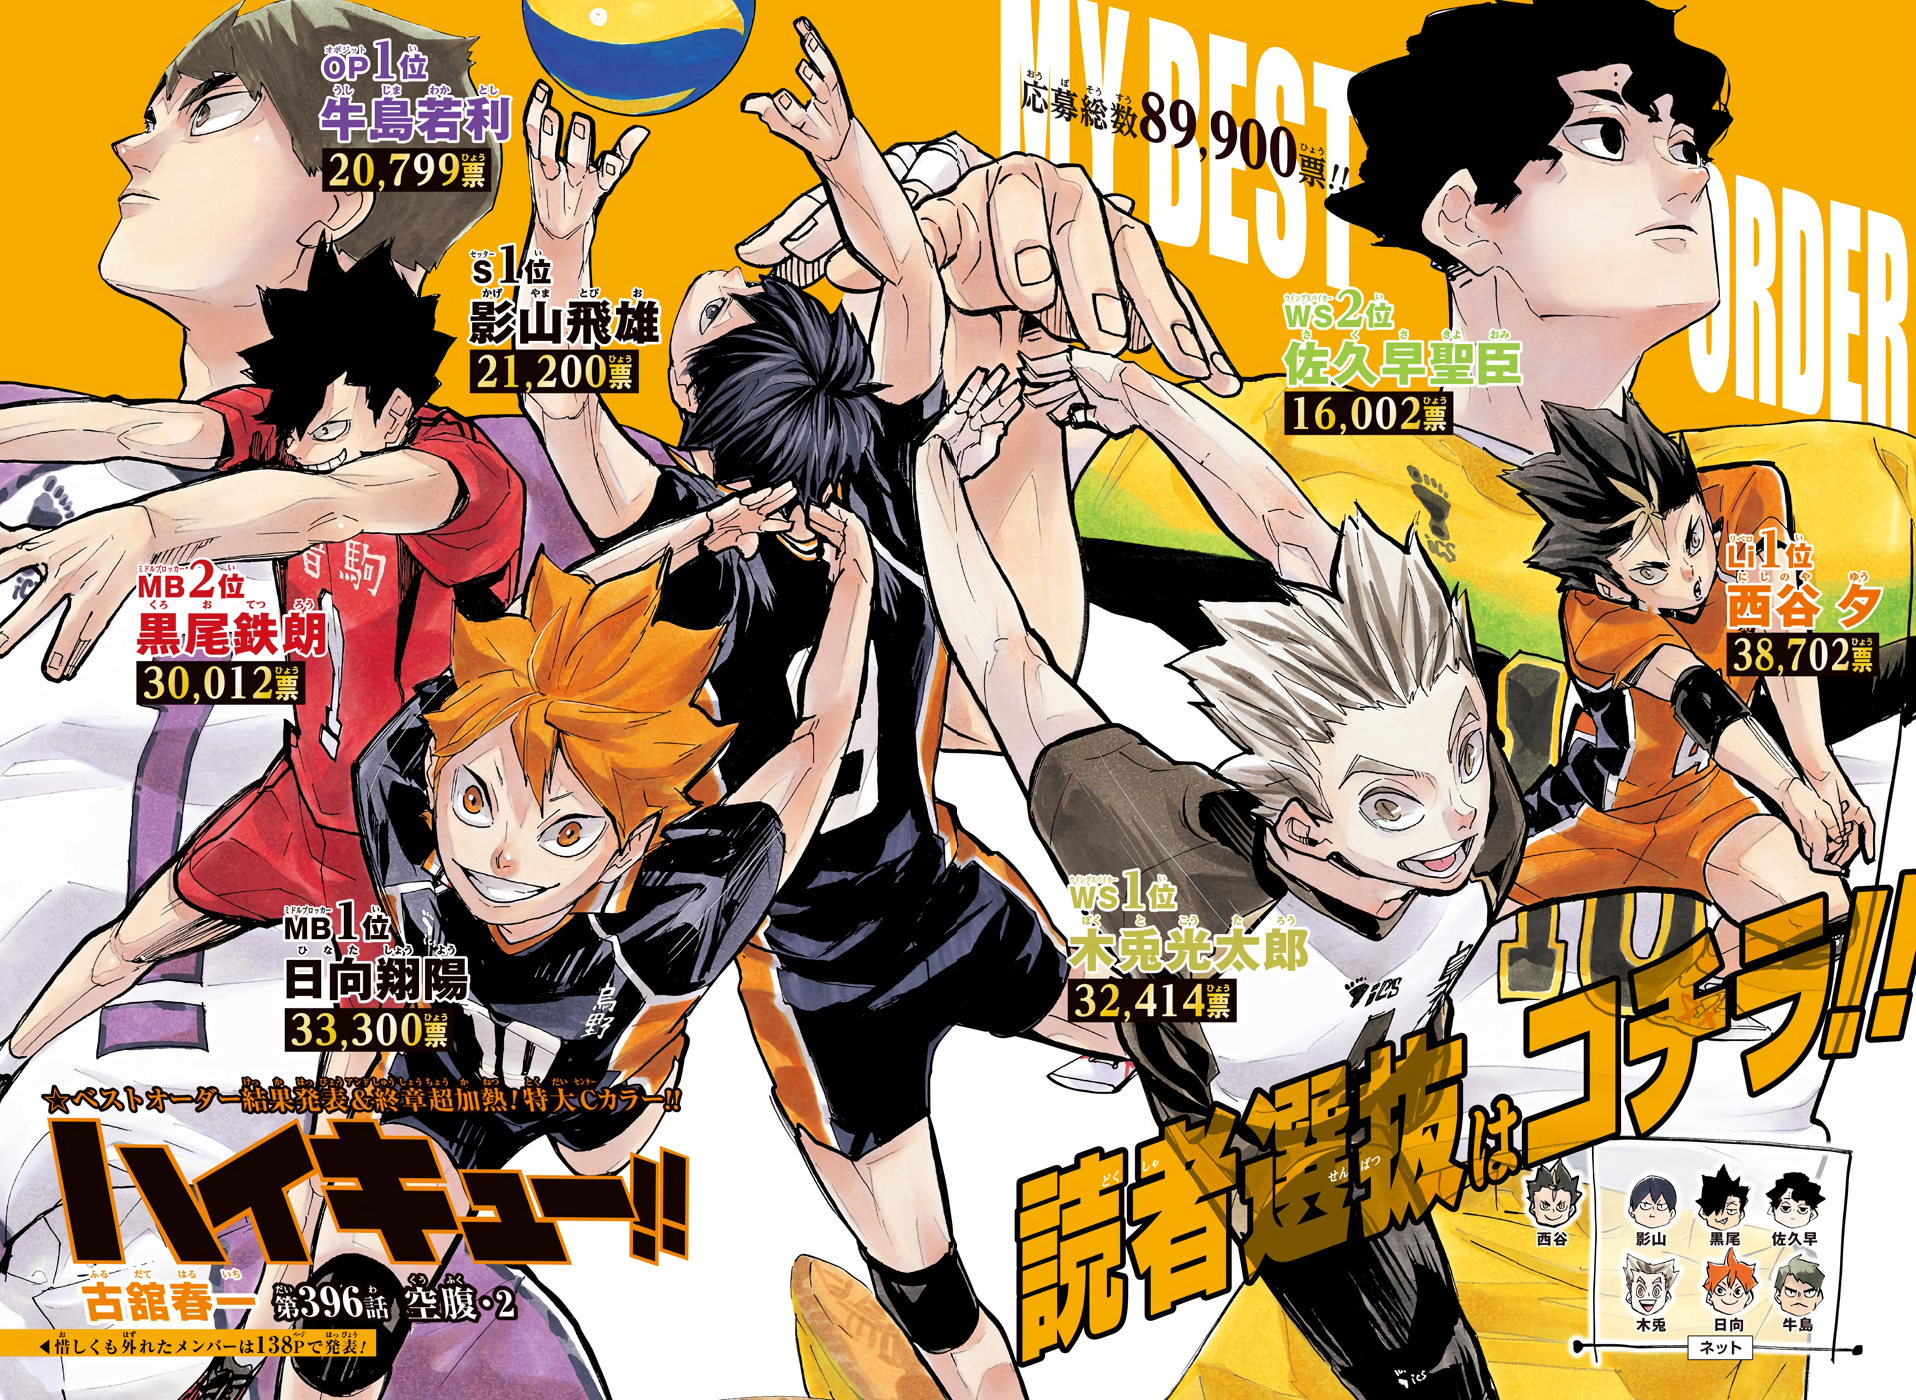 How to watch Haikyuu!! in order